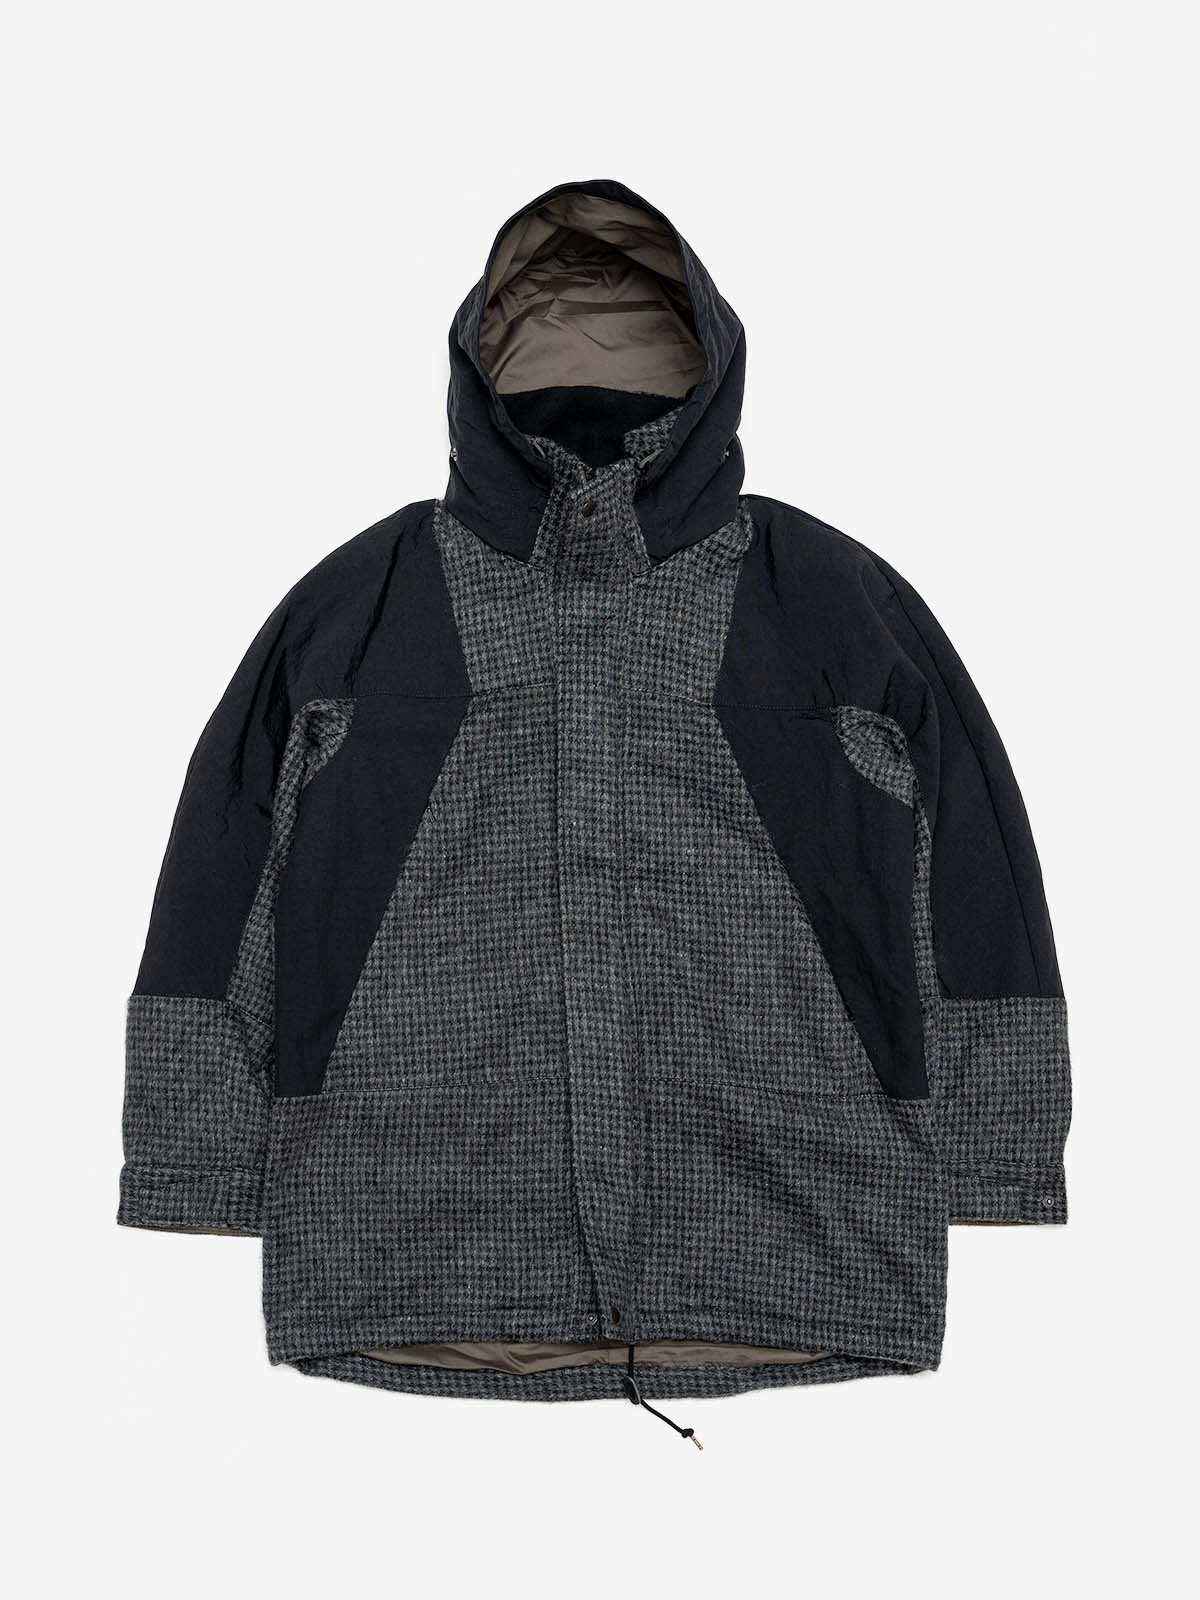 fujito mountain parka black houndstoot wool linen tempest works